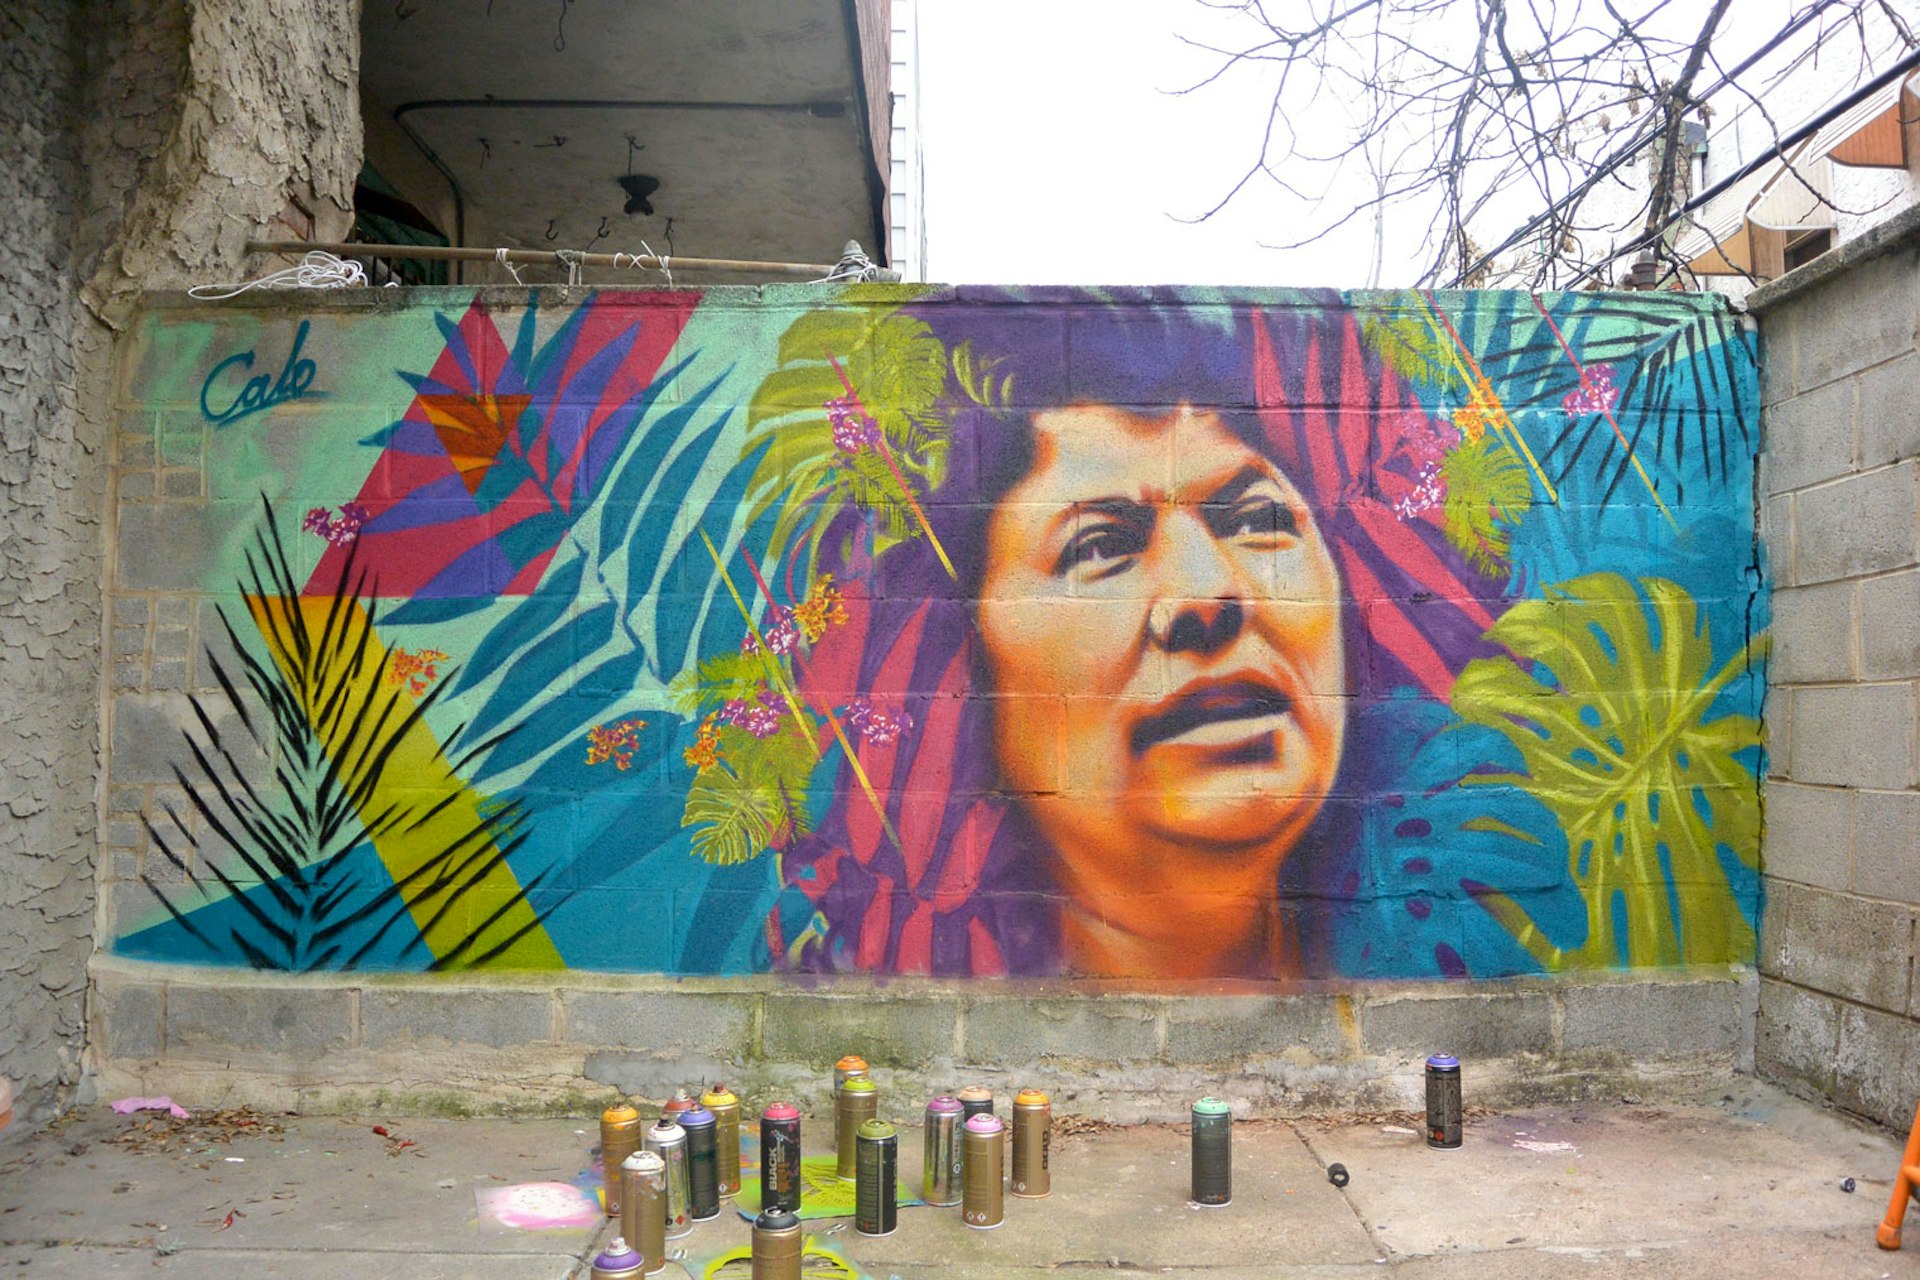 A portrait of activist Berta Cáceres by Calo on the streets of Philadelphia. Courtesy of the artist.